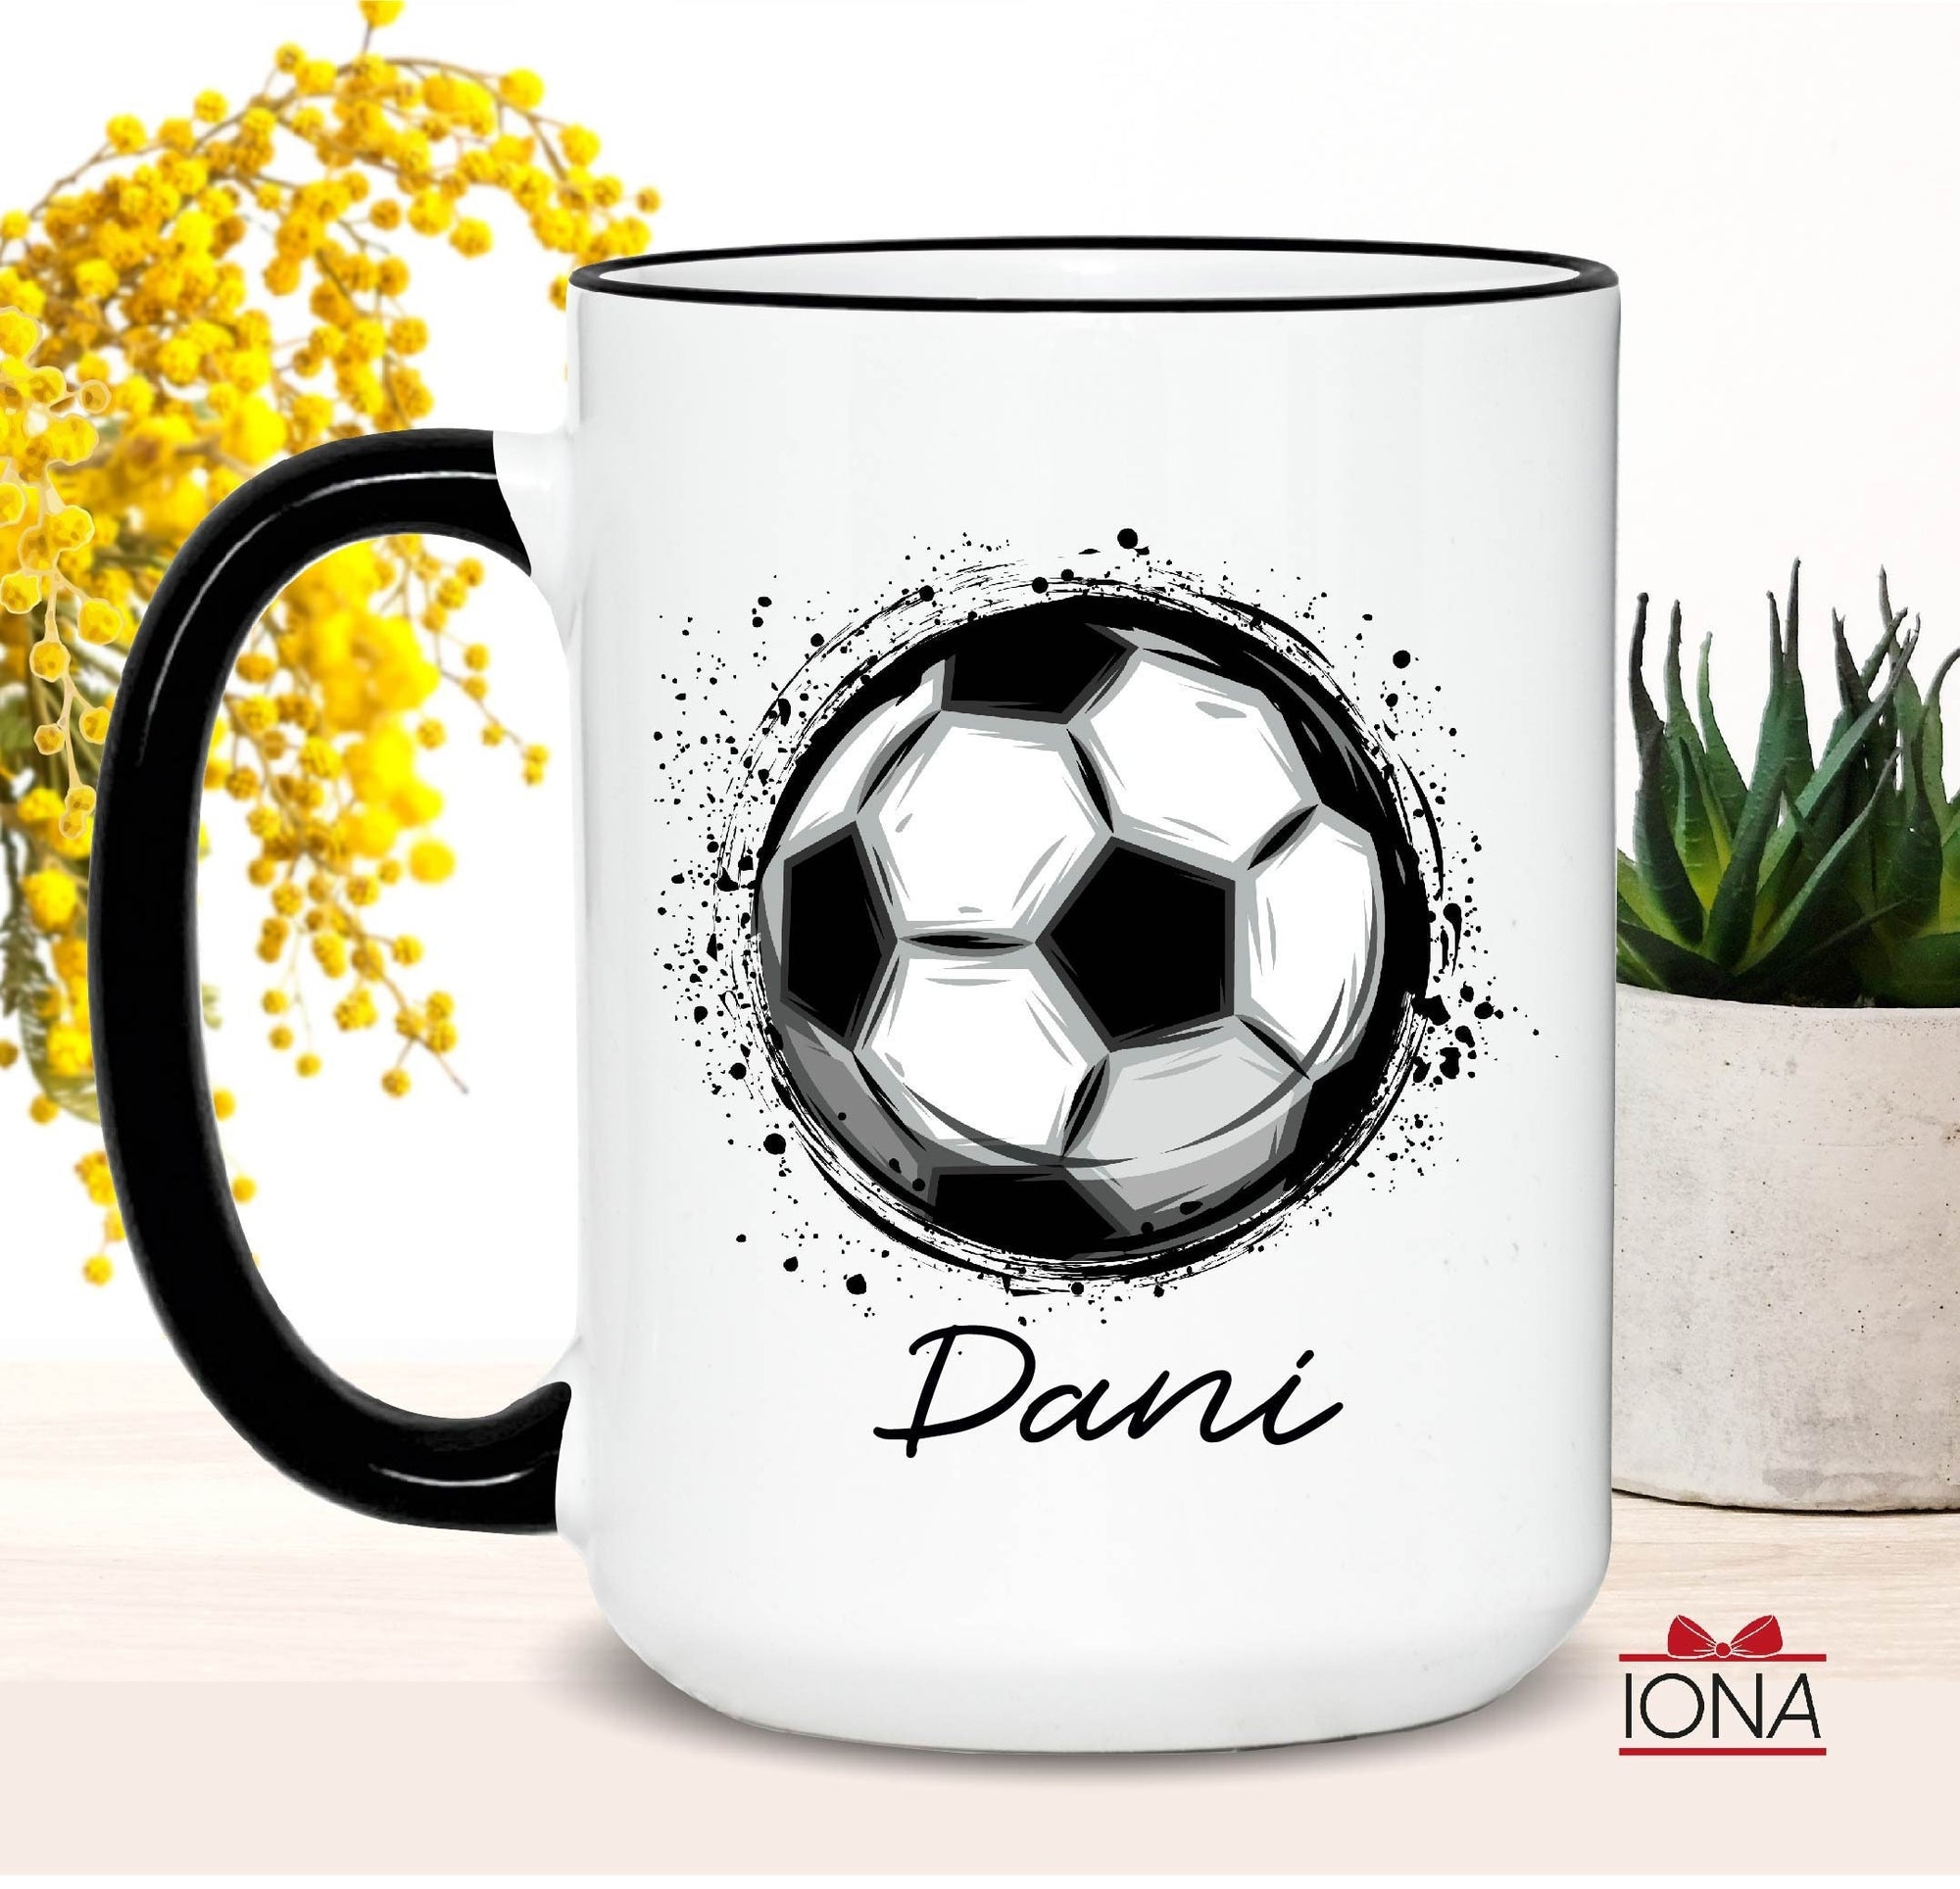 Personalized Soccer Coffee Mug, Soccer Player Gift Idea, Football Coach Gift, Soccer Gifts For Girlfriend, Soccer Gifts For Boys